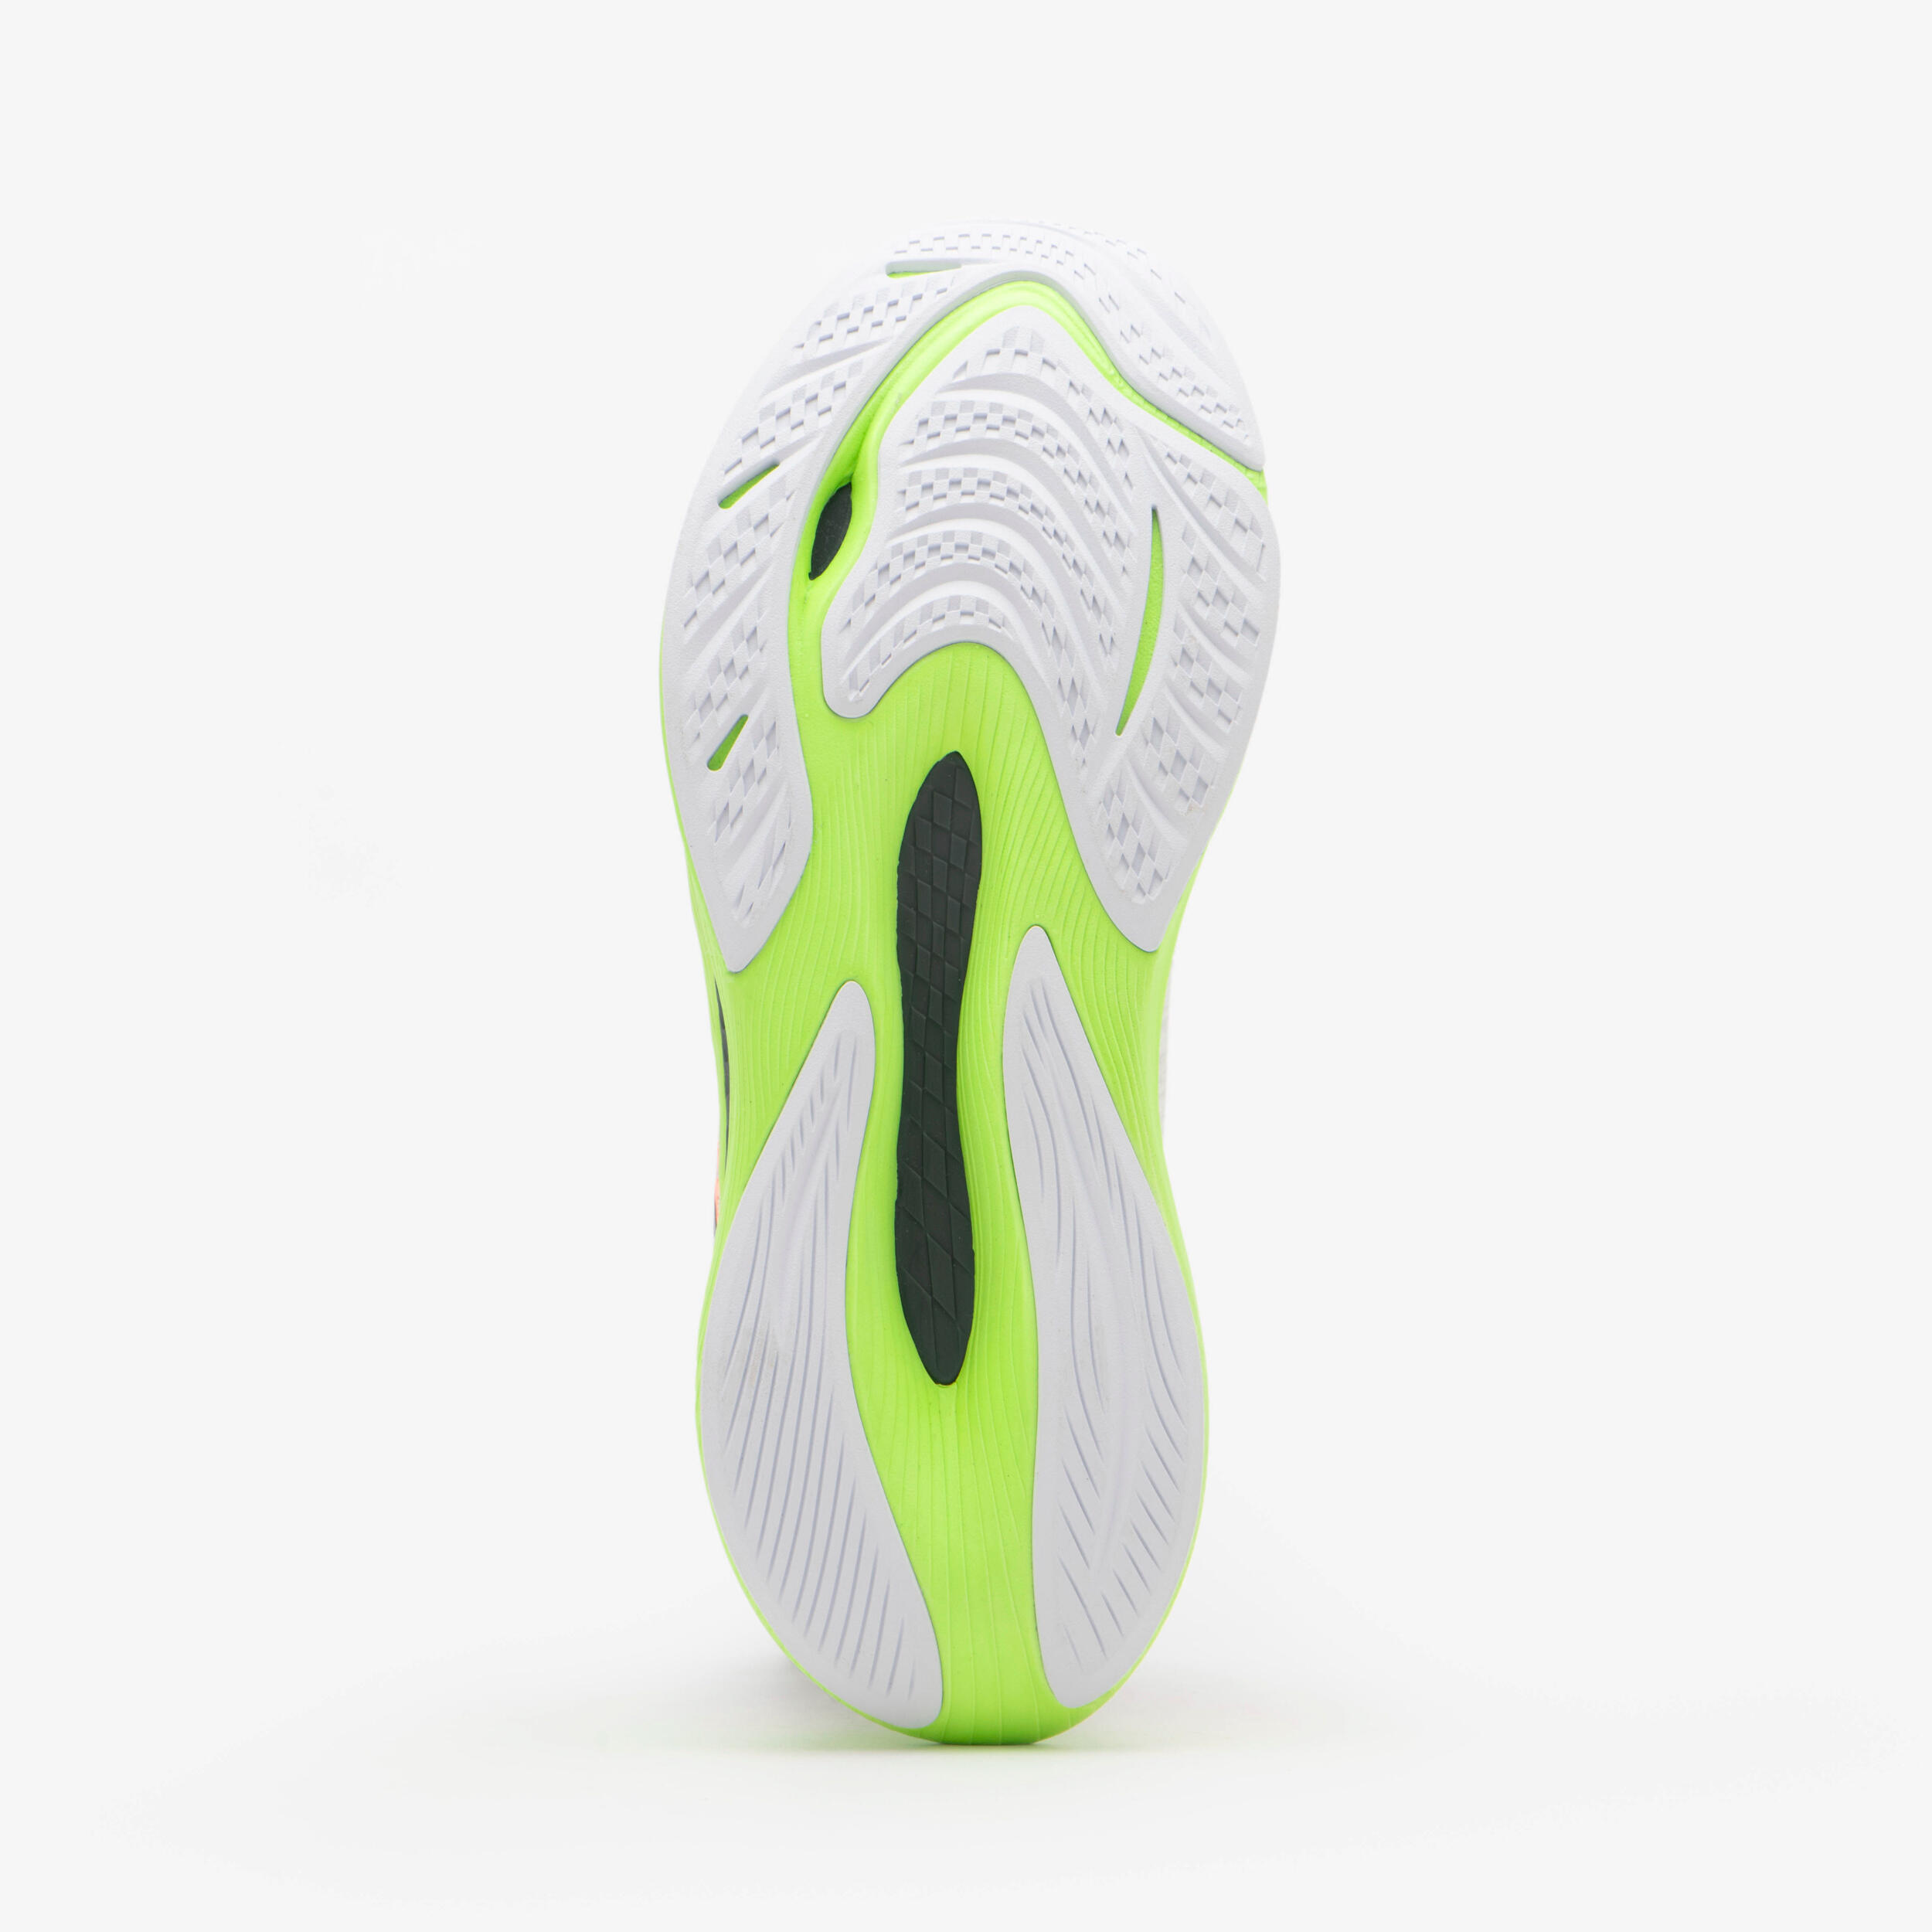 WOMEN'S NEW BALANCE FUELCELL PROPEL V4 RUNNING SHOES - WHITE AND NEON GREEN 7/7